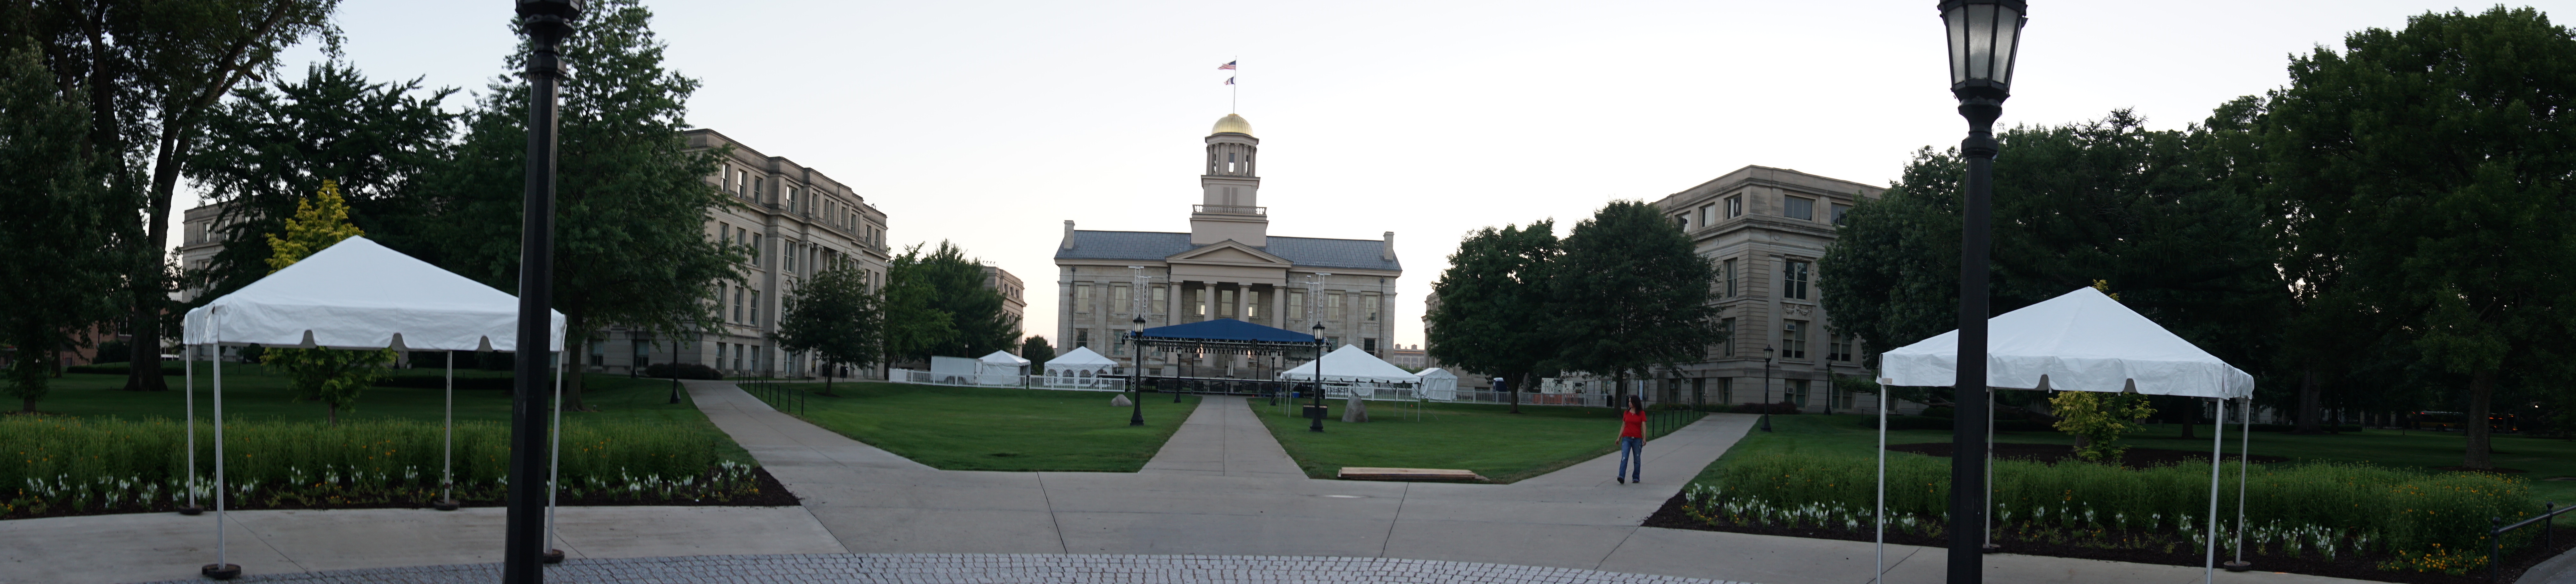 Panoramic of Old Capitol Museum with tents